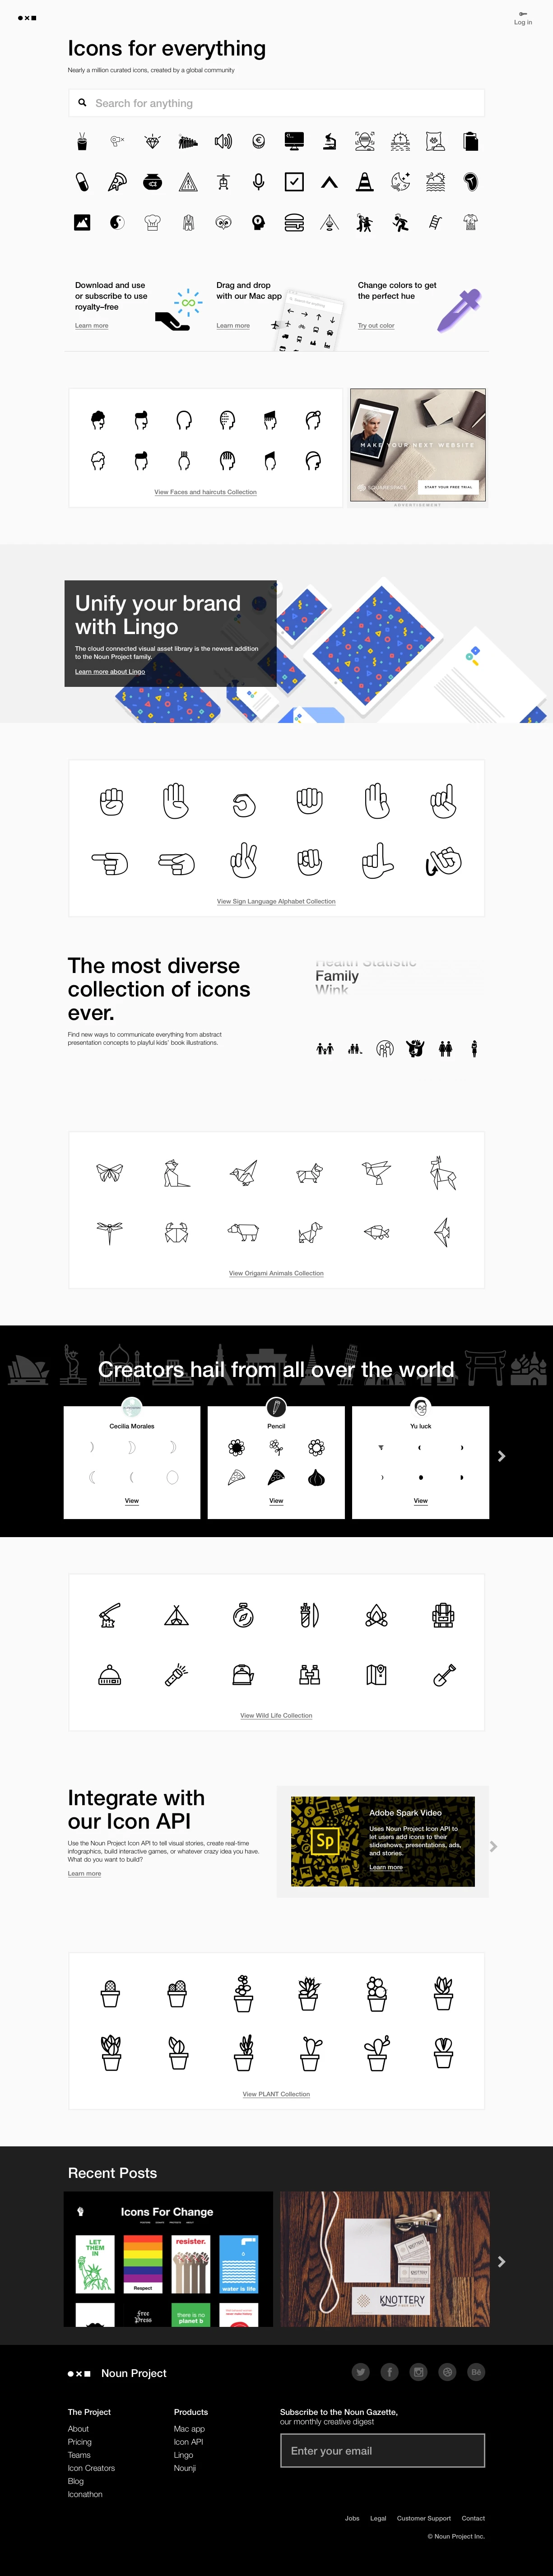 Noun Project Landing Page Example: Nearly a million curated icons, created by a global community